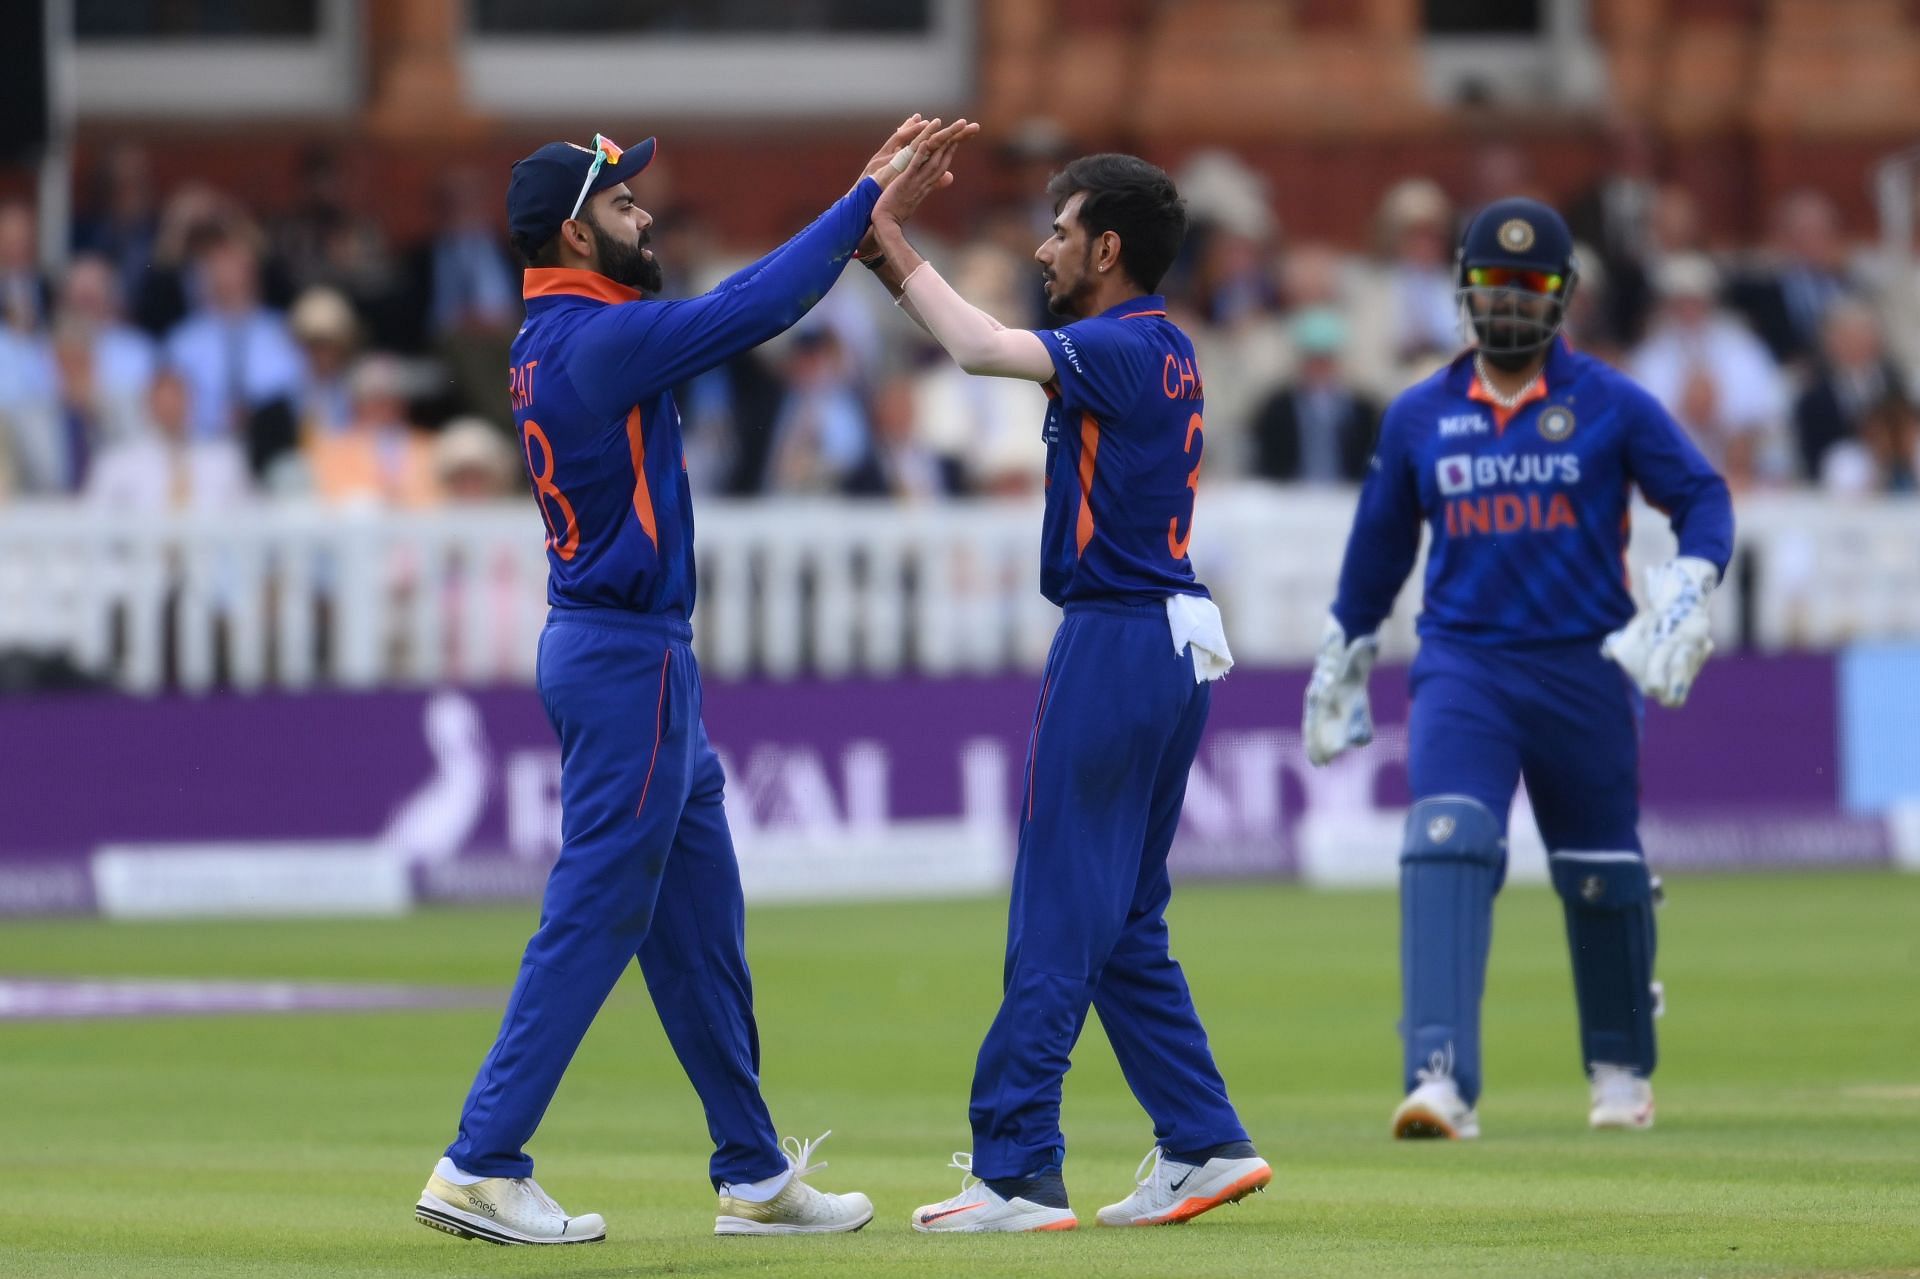 Yuzvendra Chahal offers four overs, but are those four overs meaningful enough to a T20 game?